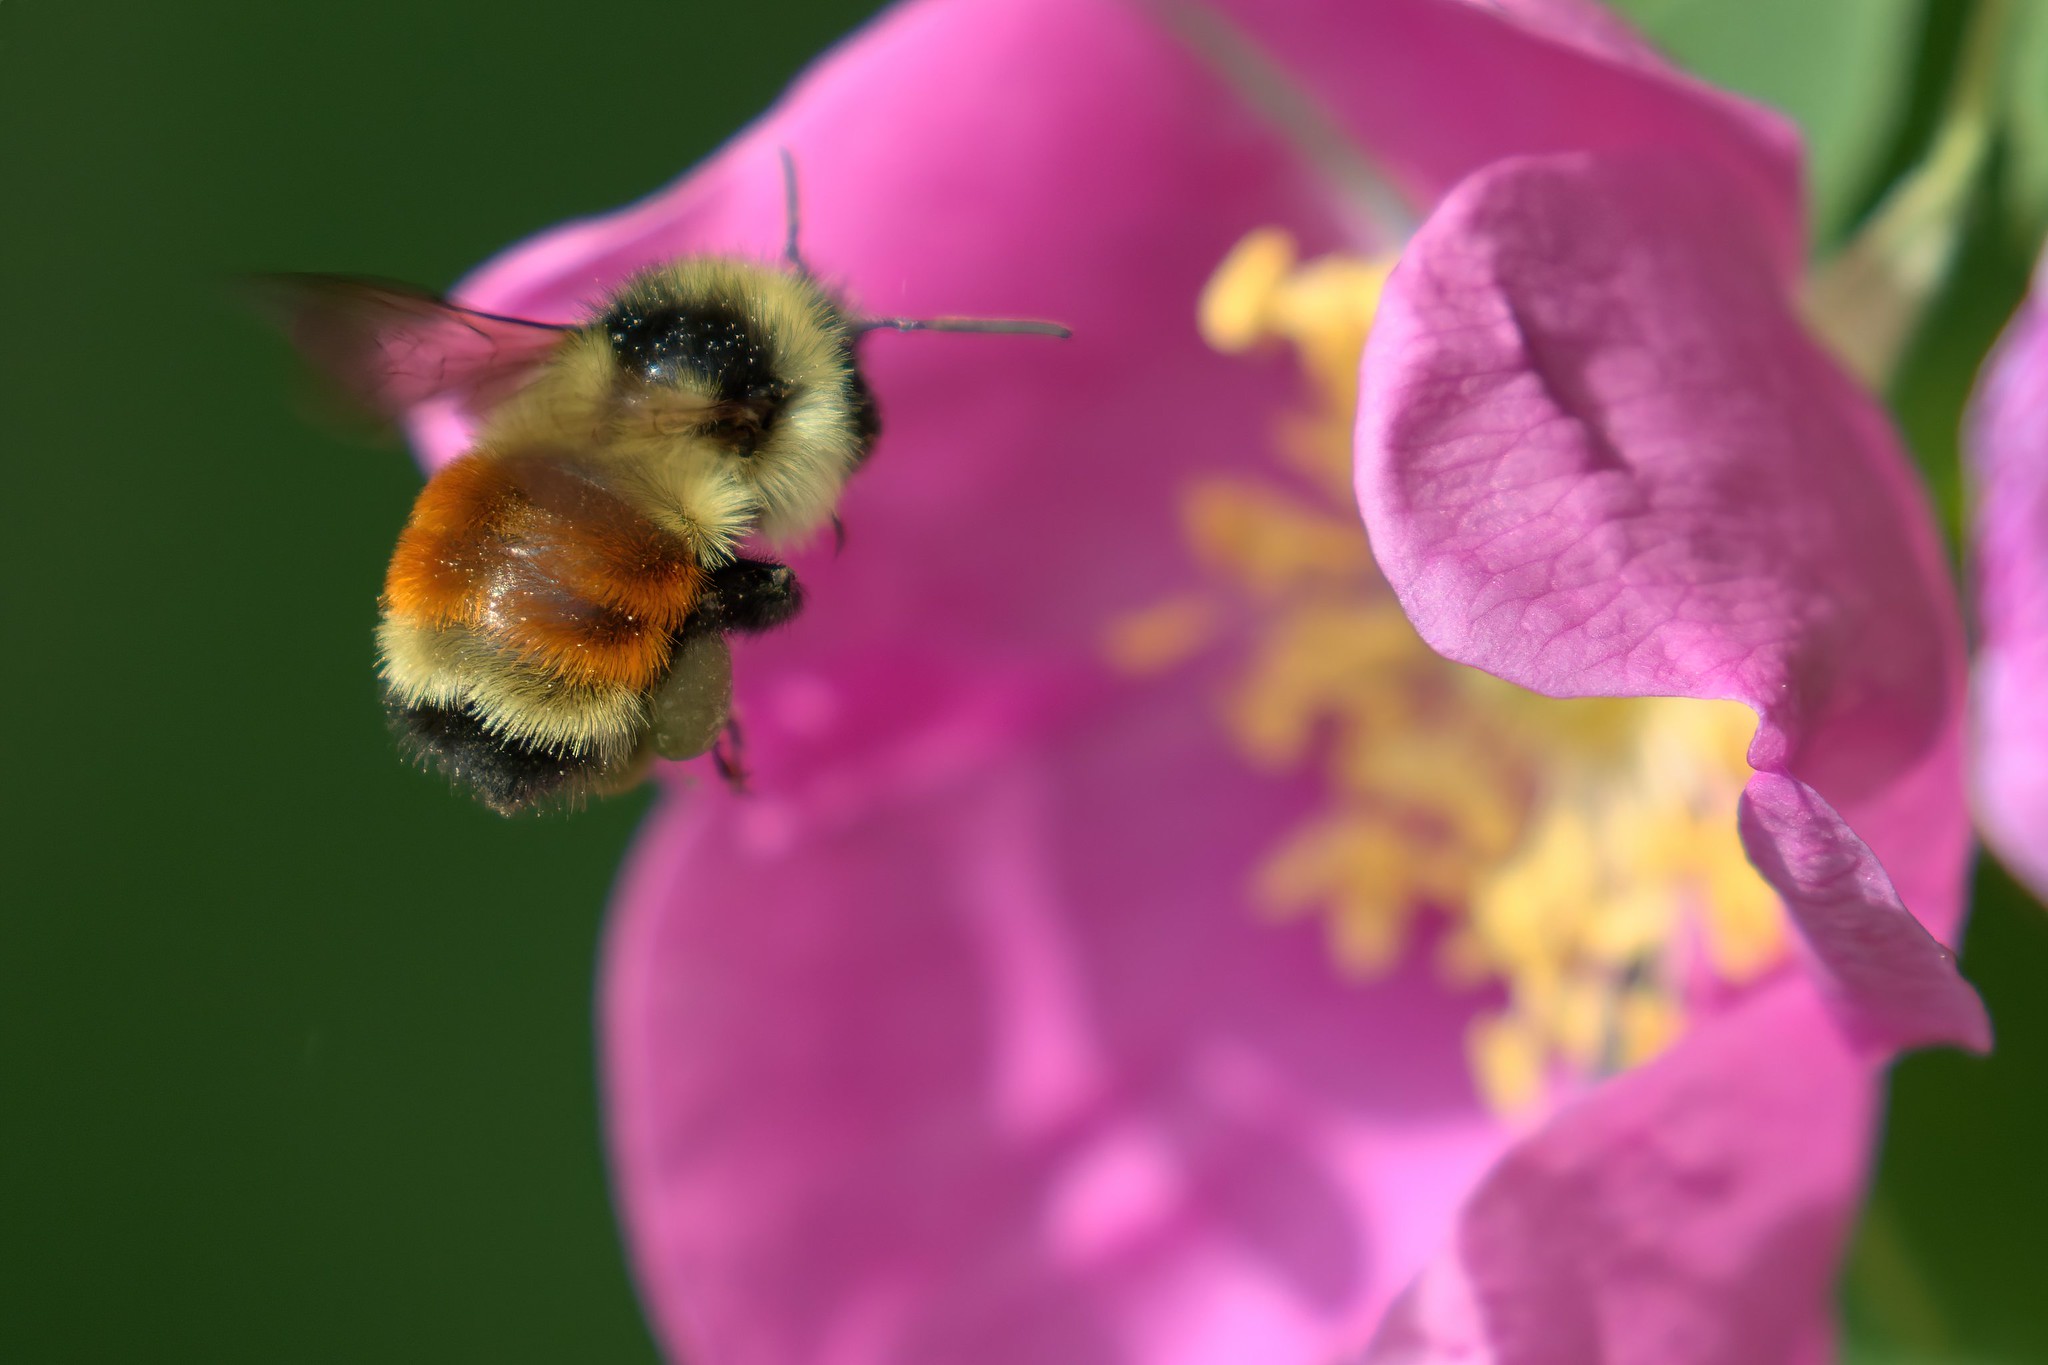 Wild rose and bumble bee by R SCHNEIDER